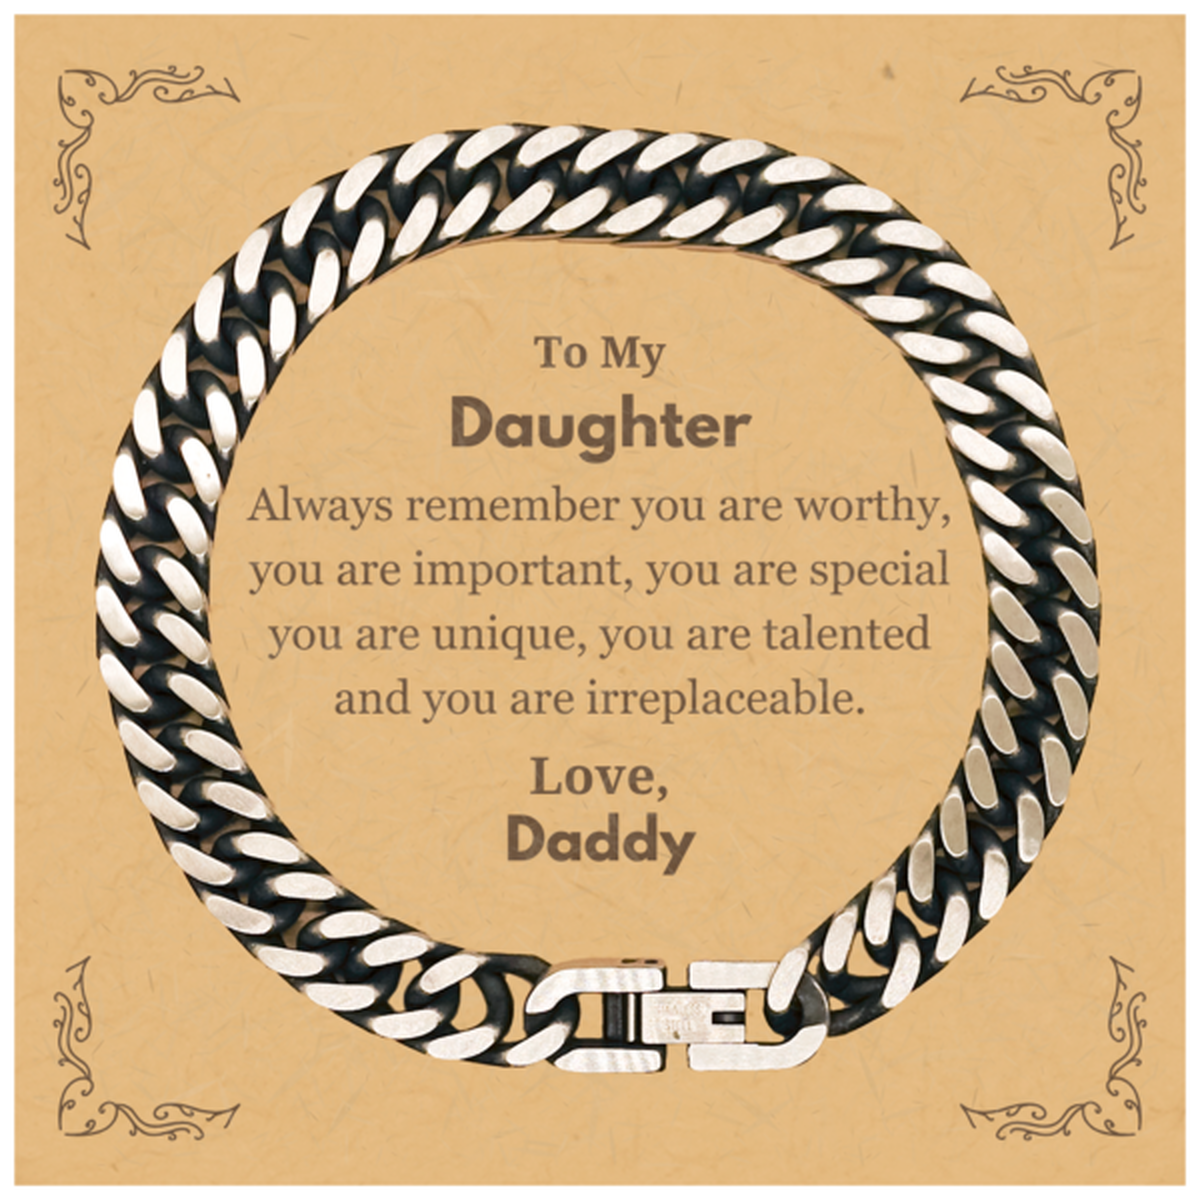 Daughter Birthday Gifts from Daddy, Inspirational Cuban Link Chain Bracelet for Daughter Christmas Graduation Gifts for Daughter Always remember you are worthy, you are important. Love, Daddy